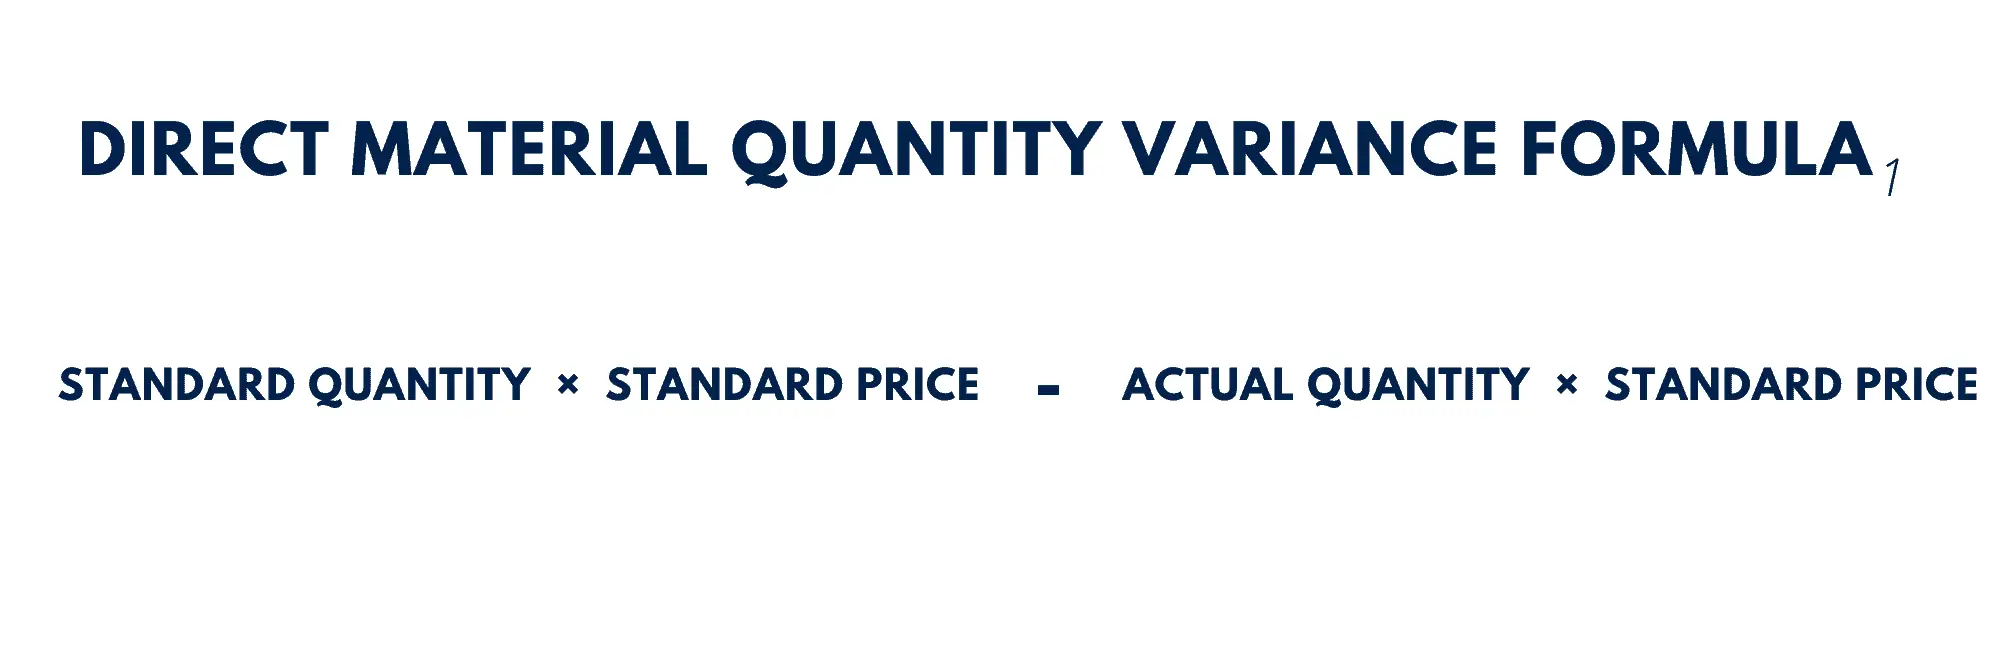 Direct Material Quantity Variance = Standard Quantity × Standard Price - Actual Quantity × Standard Price